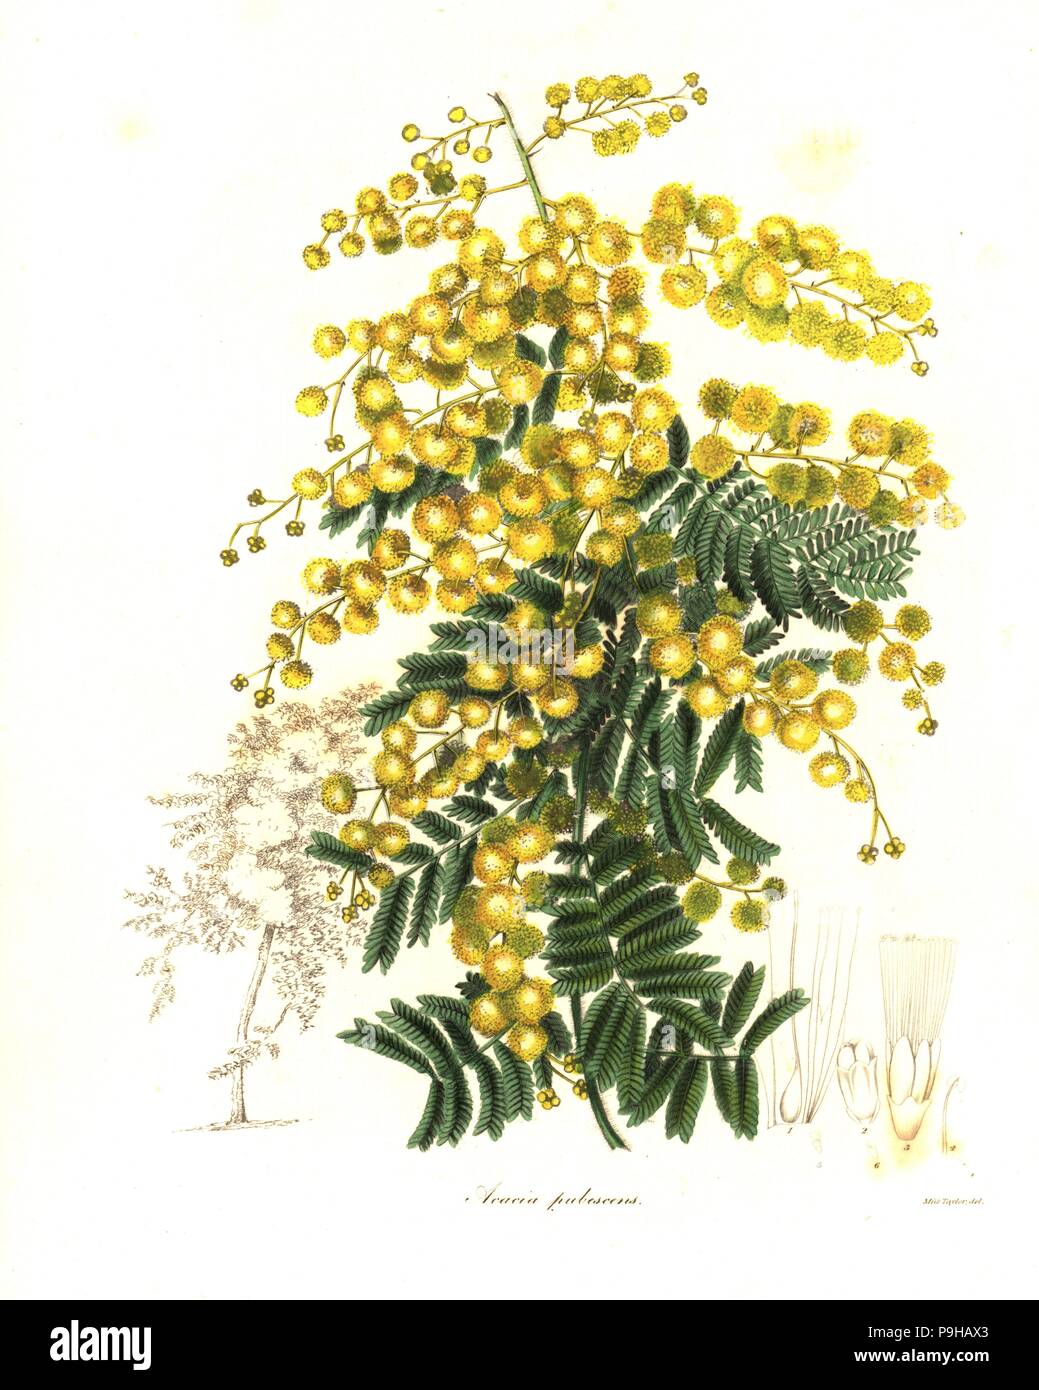 Downy wattle or pubescent acacia, Acacia pubescens. Endangered.Handcoloured copperplate engraving after a botanical illustration by Miss Jane Taylor from Benjamin Maund and the Rev. John Stevens Henslow's The Botanist, London, 1836. Stock Photo